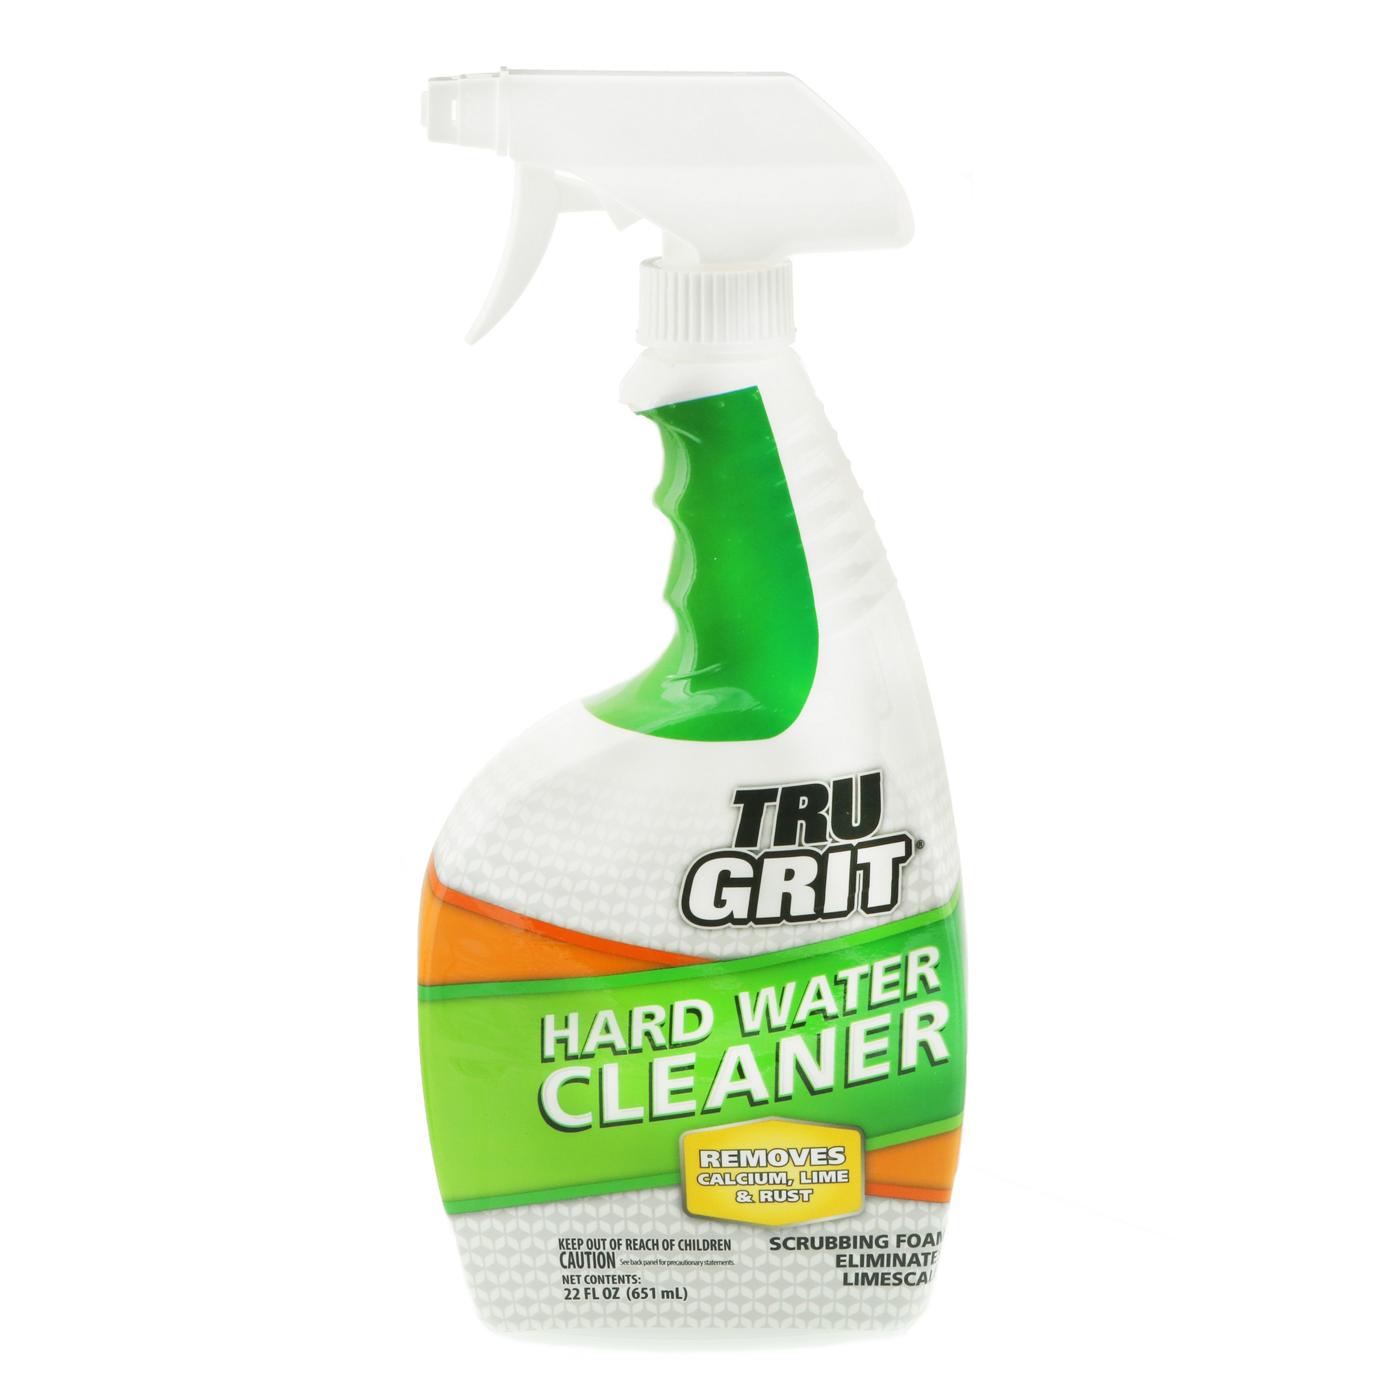 H-E-B Tru Grit Hard Water Cleaner; image 1 of 2